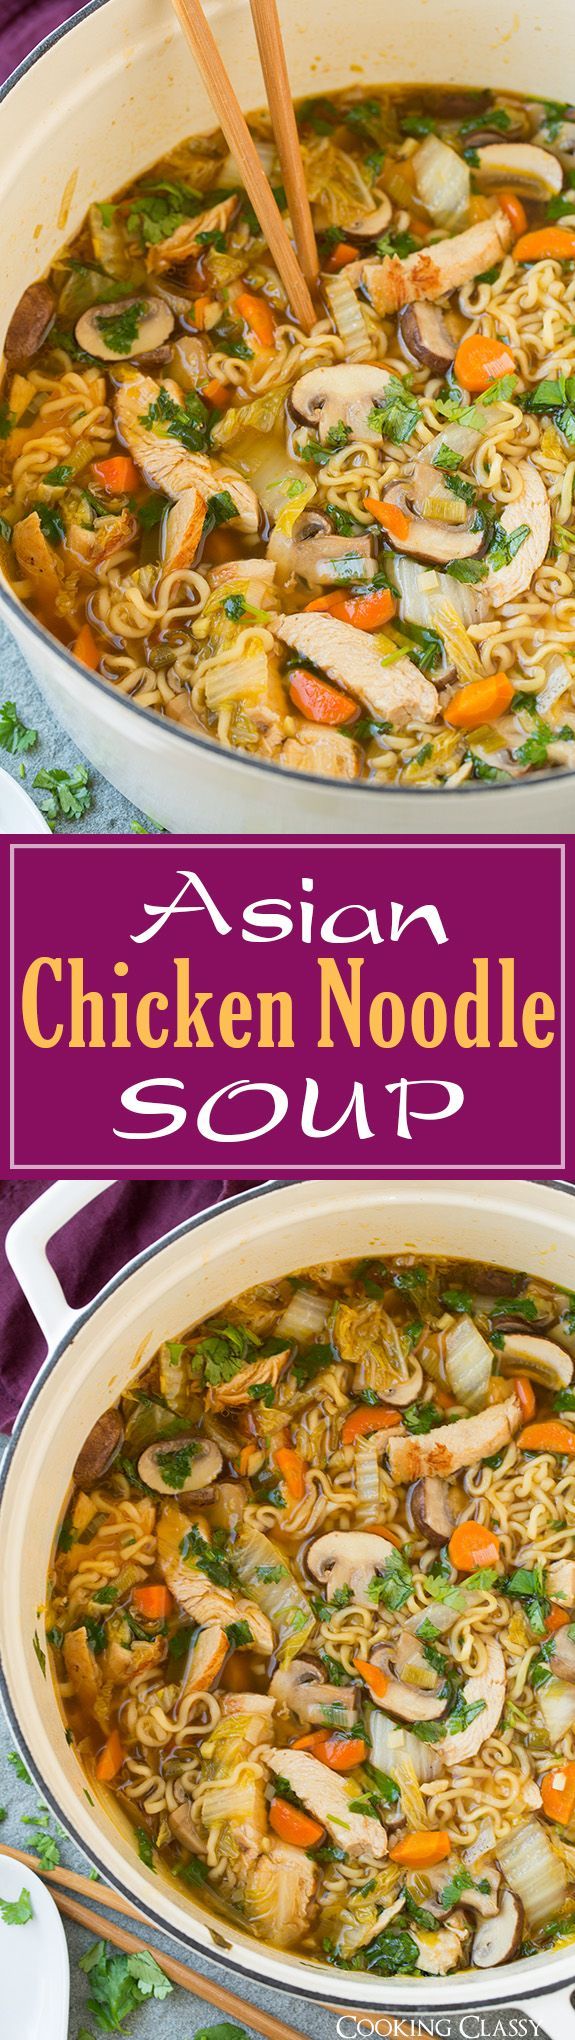 Asian Chicken Noodle Soup – this ramen spin on chicken noodle soup is SO DELICIOUS! Easy to make and perfect for a cold fall day!